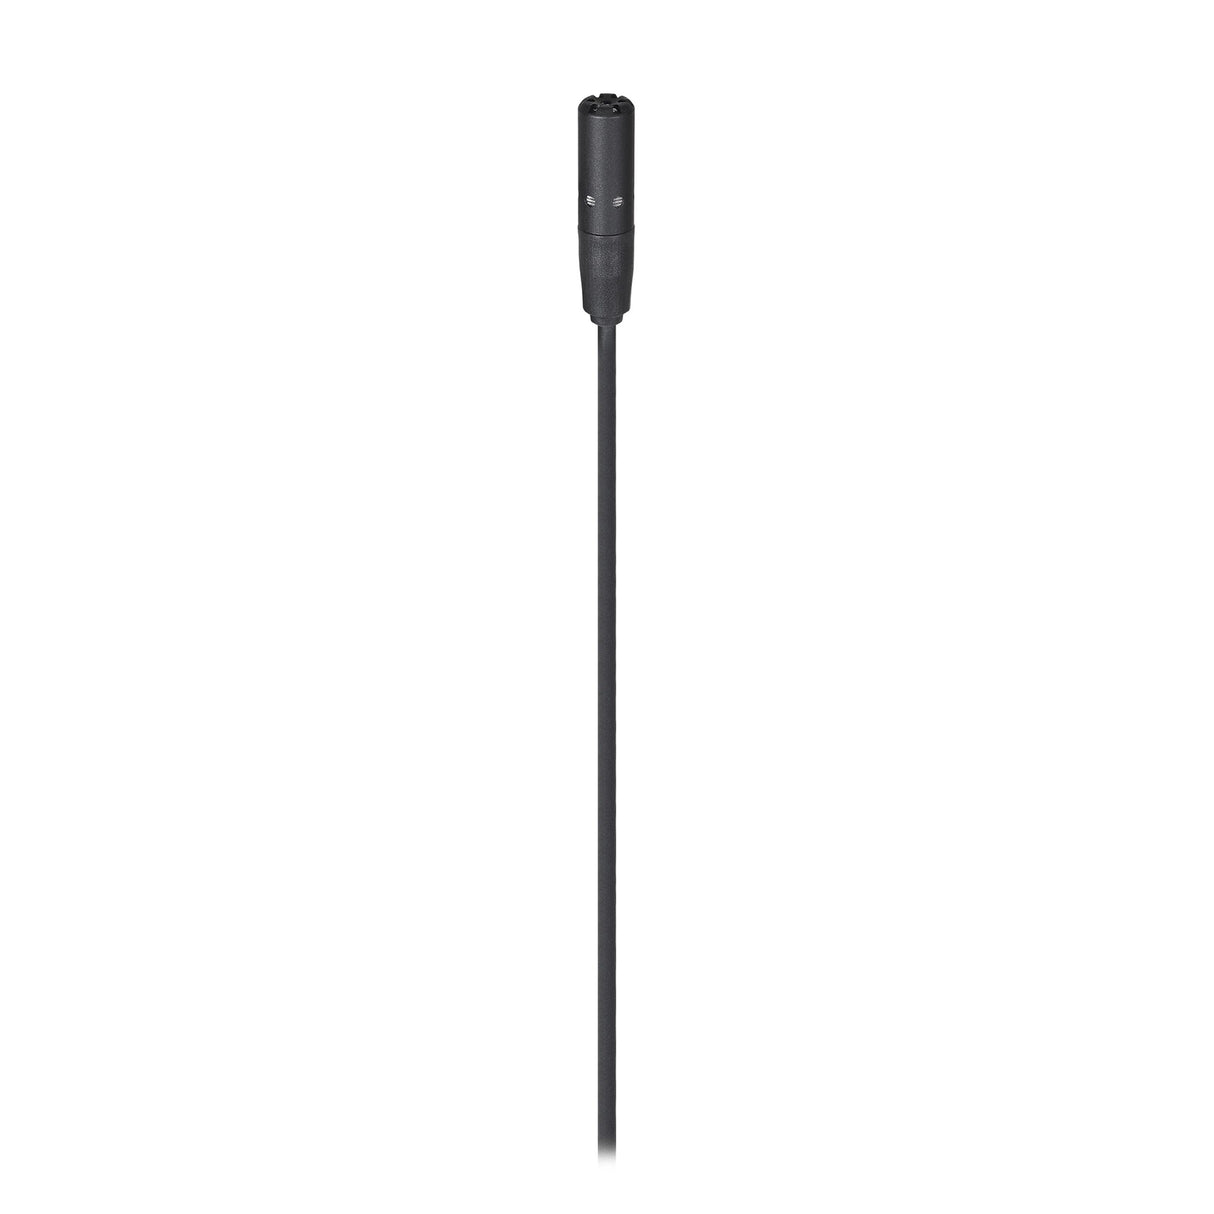 Audio-Technica BP898cW Cardioid Condenser Lavalier Microphone, 4-Pin HRS